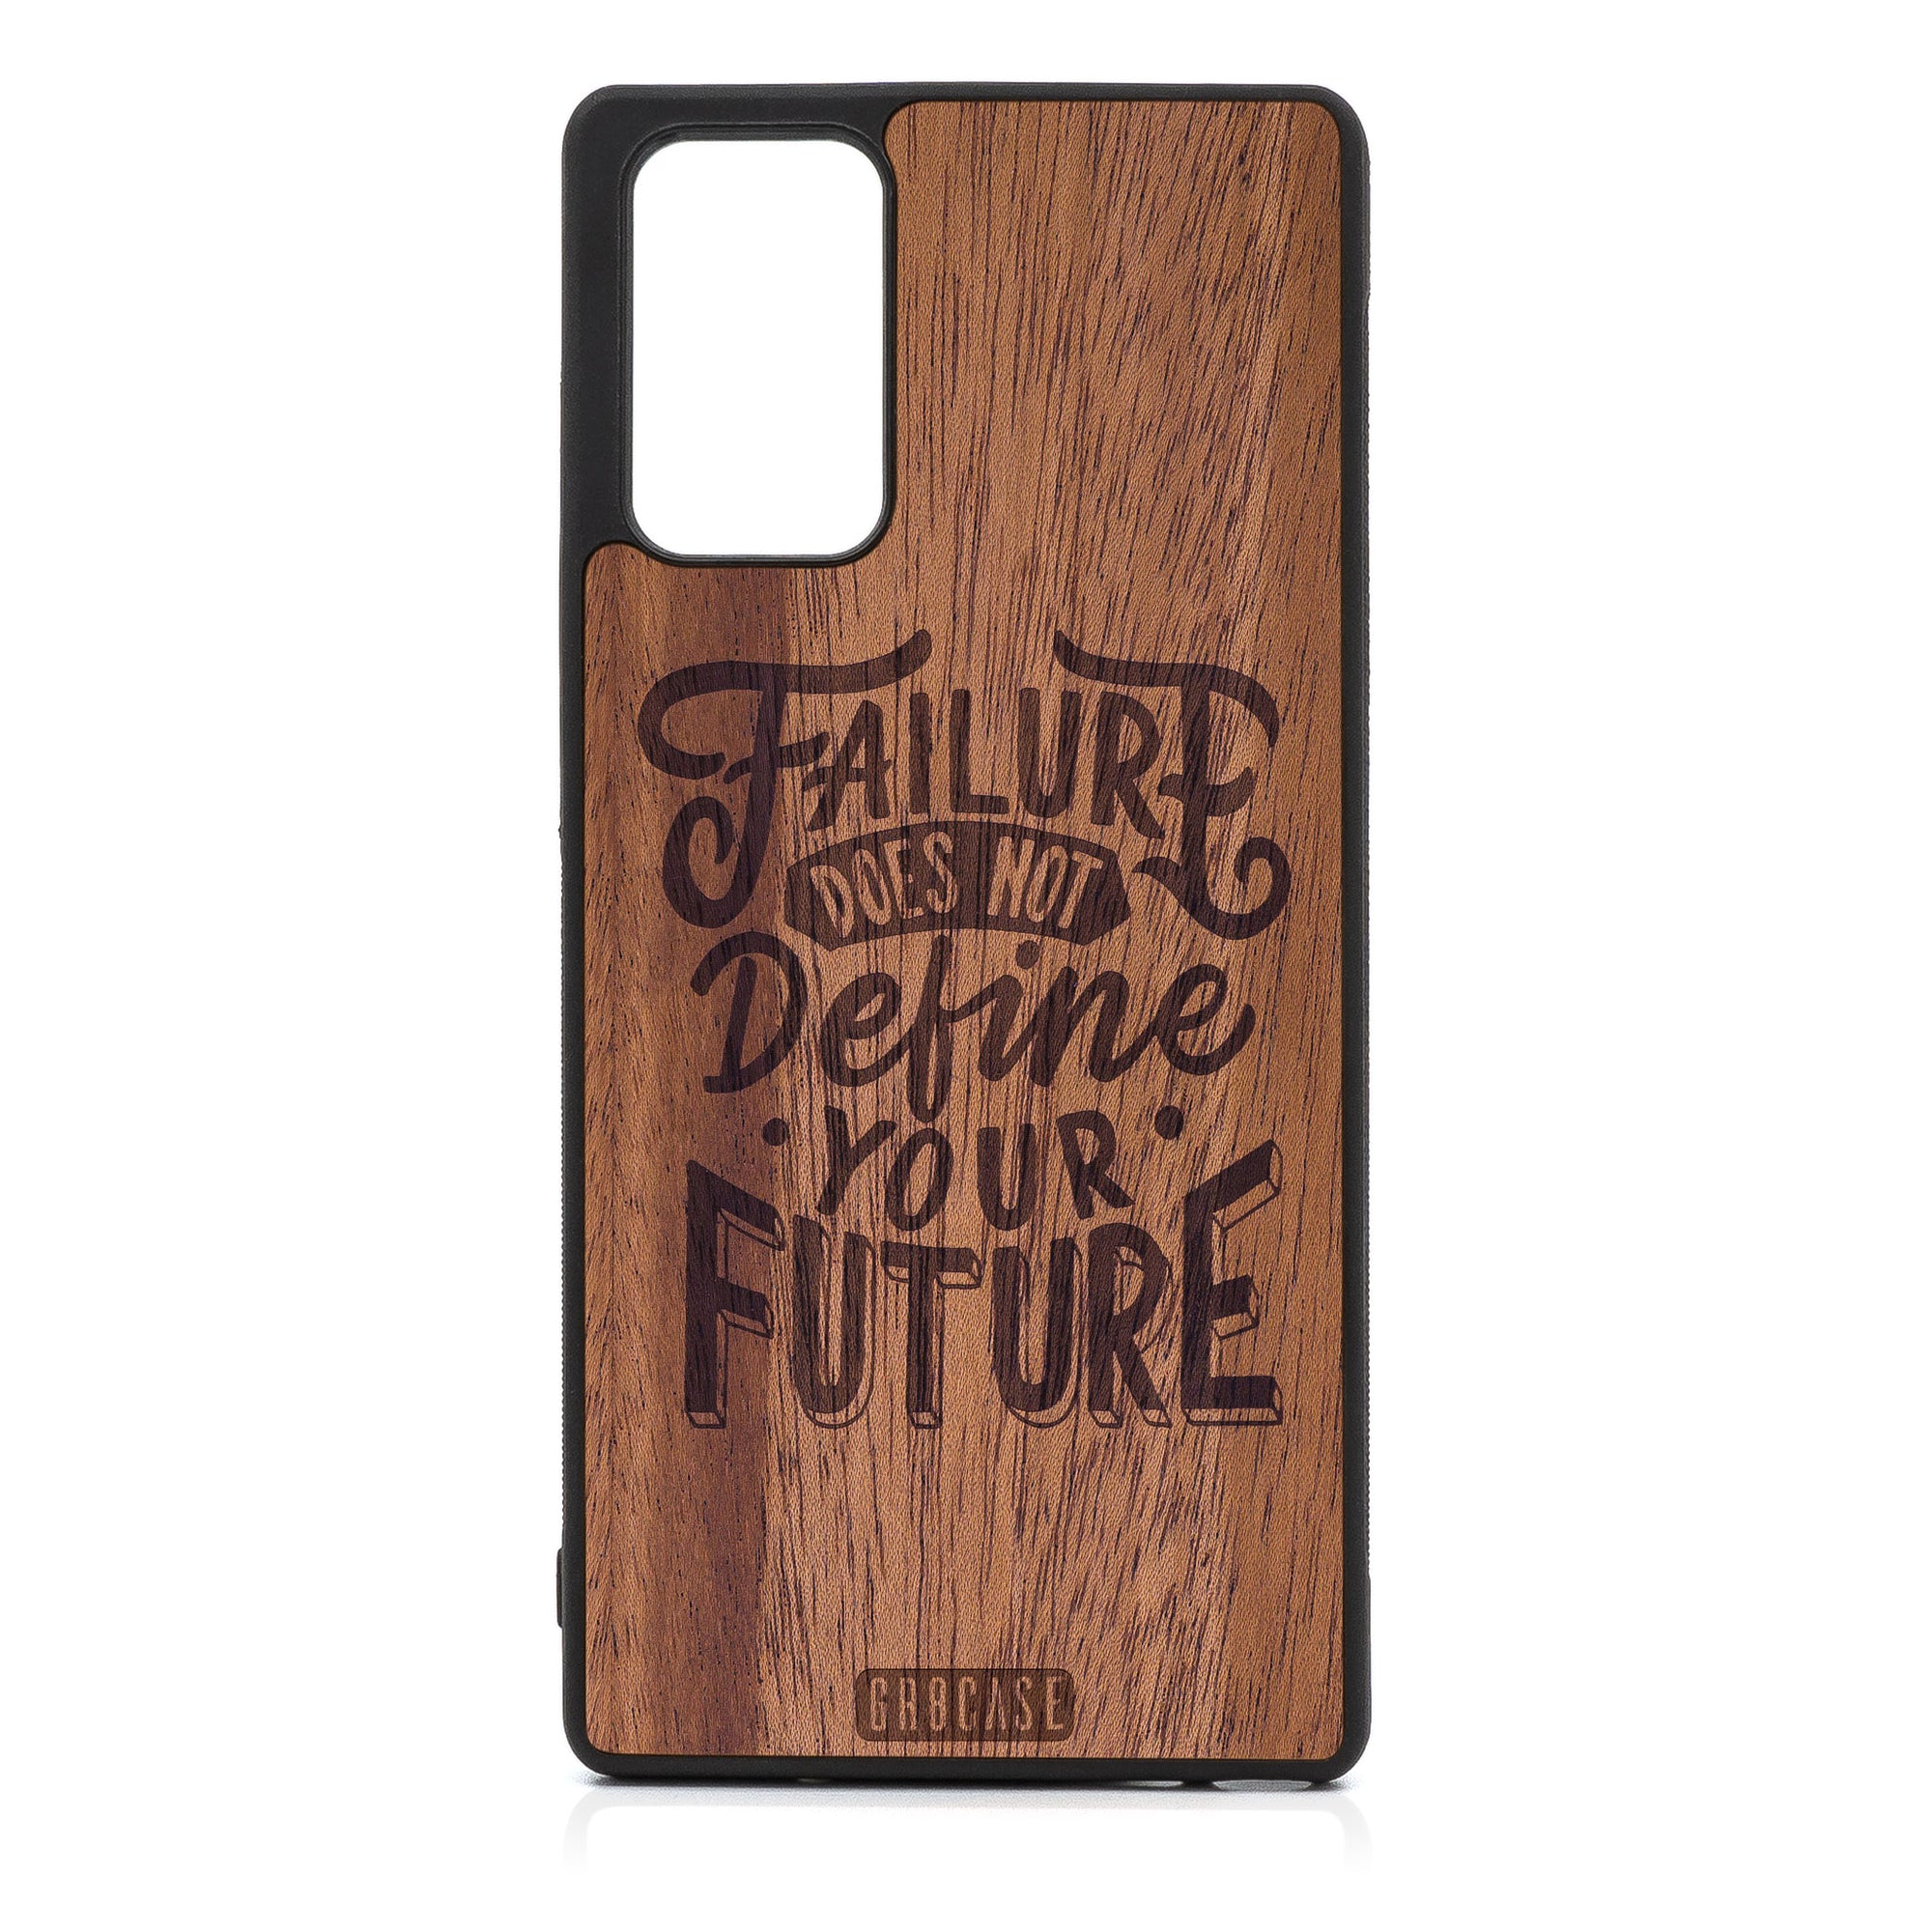 Failure Does Not Define You Future Design Wood Case For Samsung Galaxy Note 20